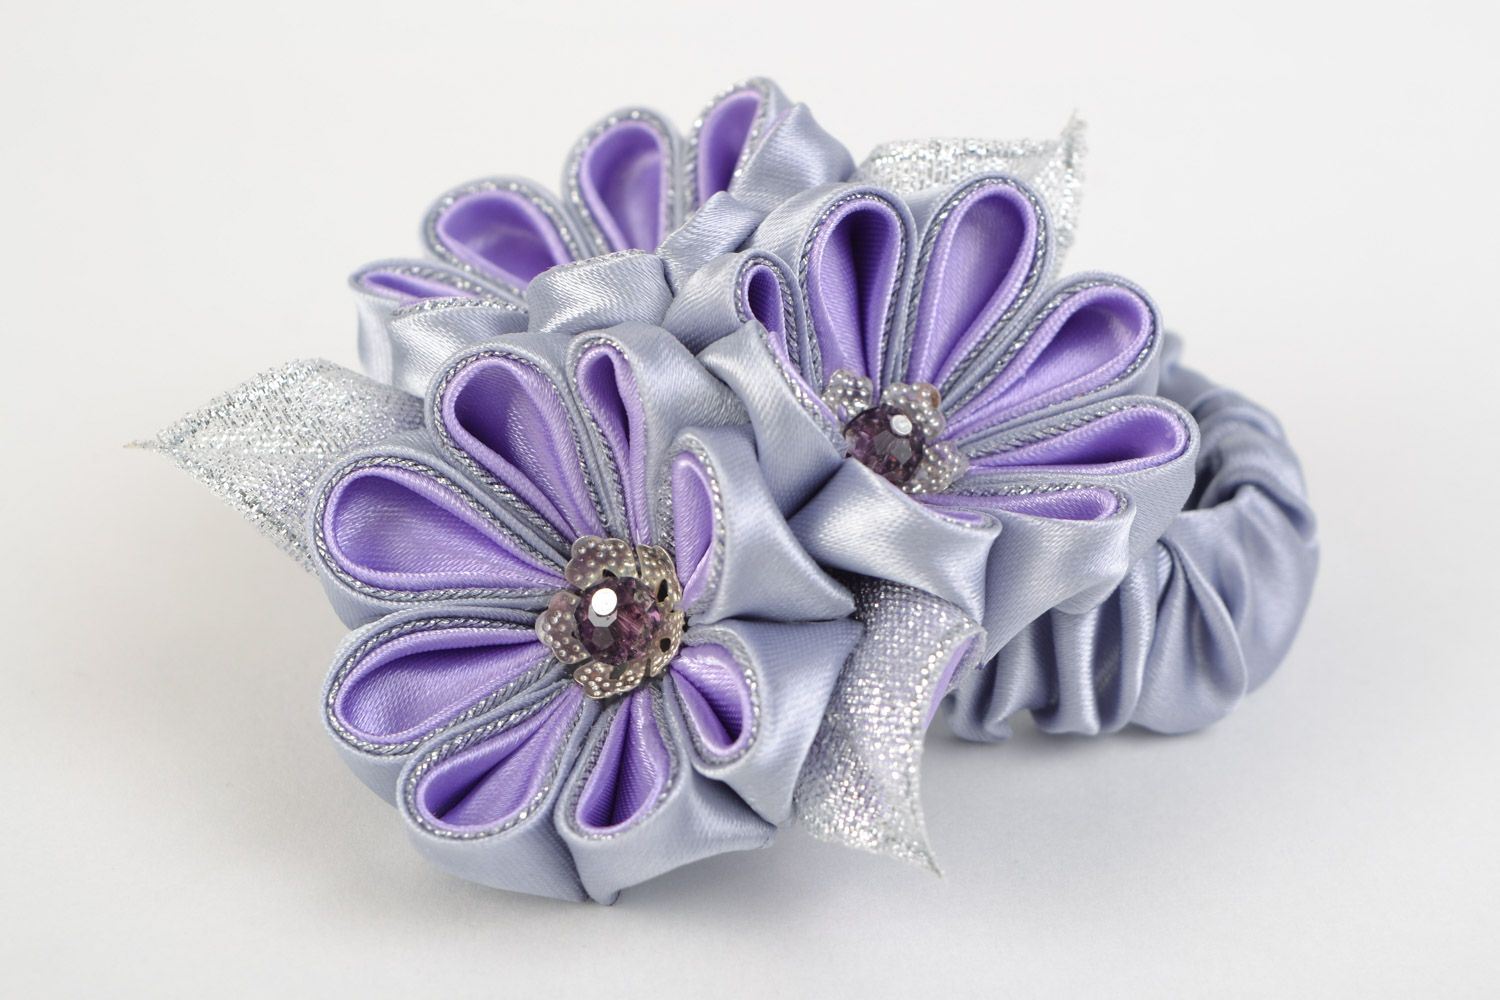 Handmade kanzashi flower hair tie of gray and lilac colors photo 2